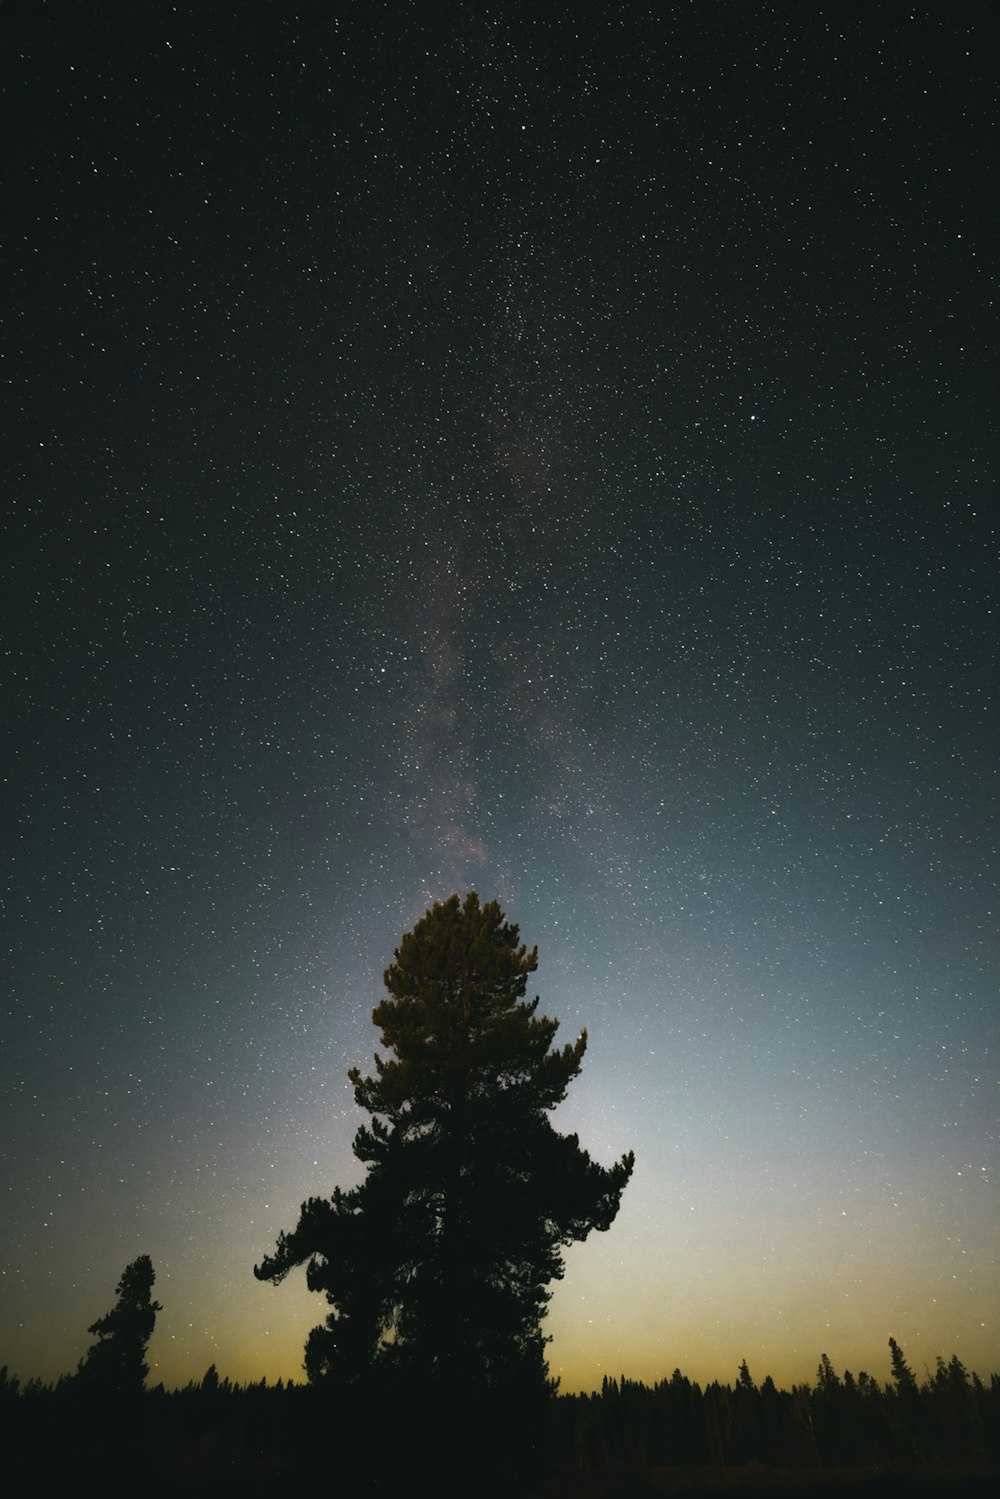 a tree with the milky way in the sky